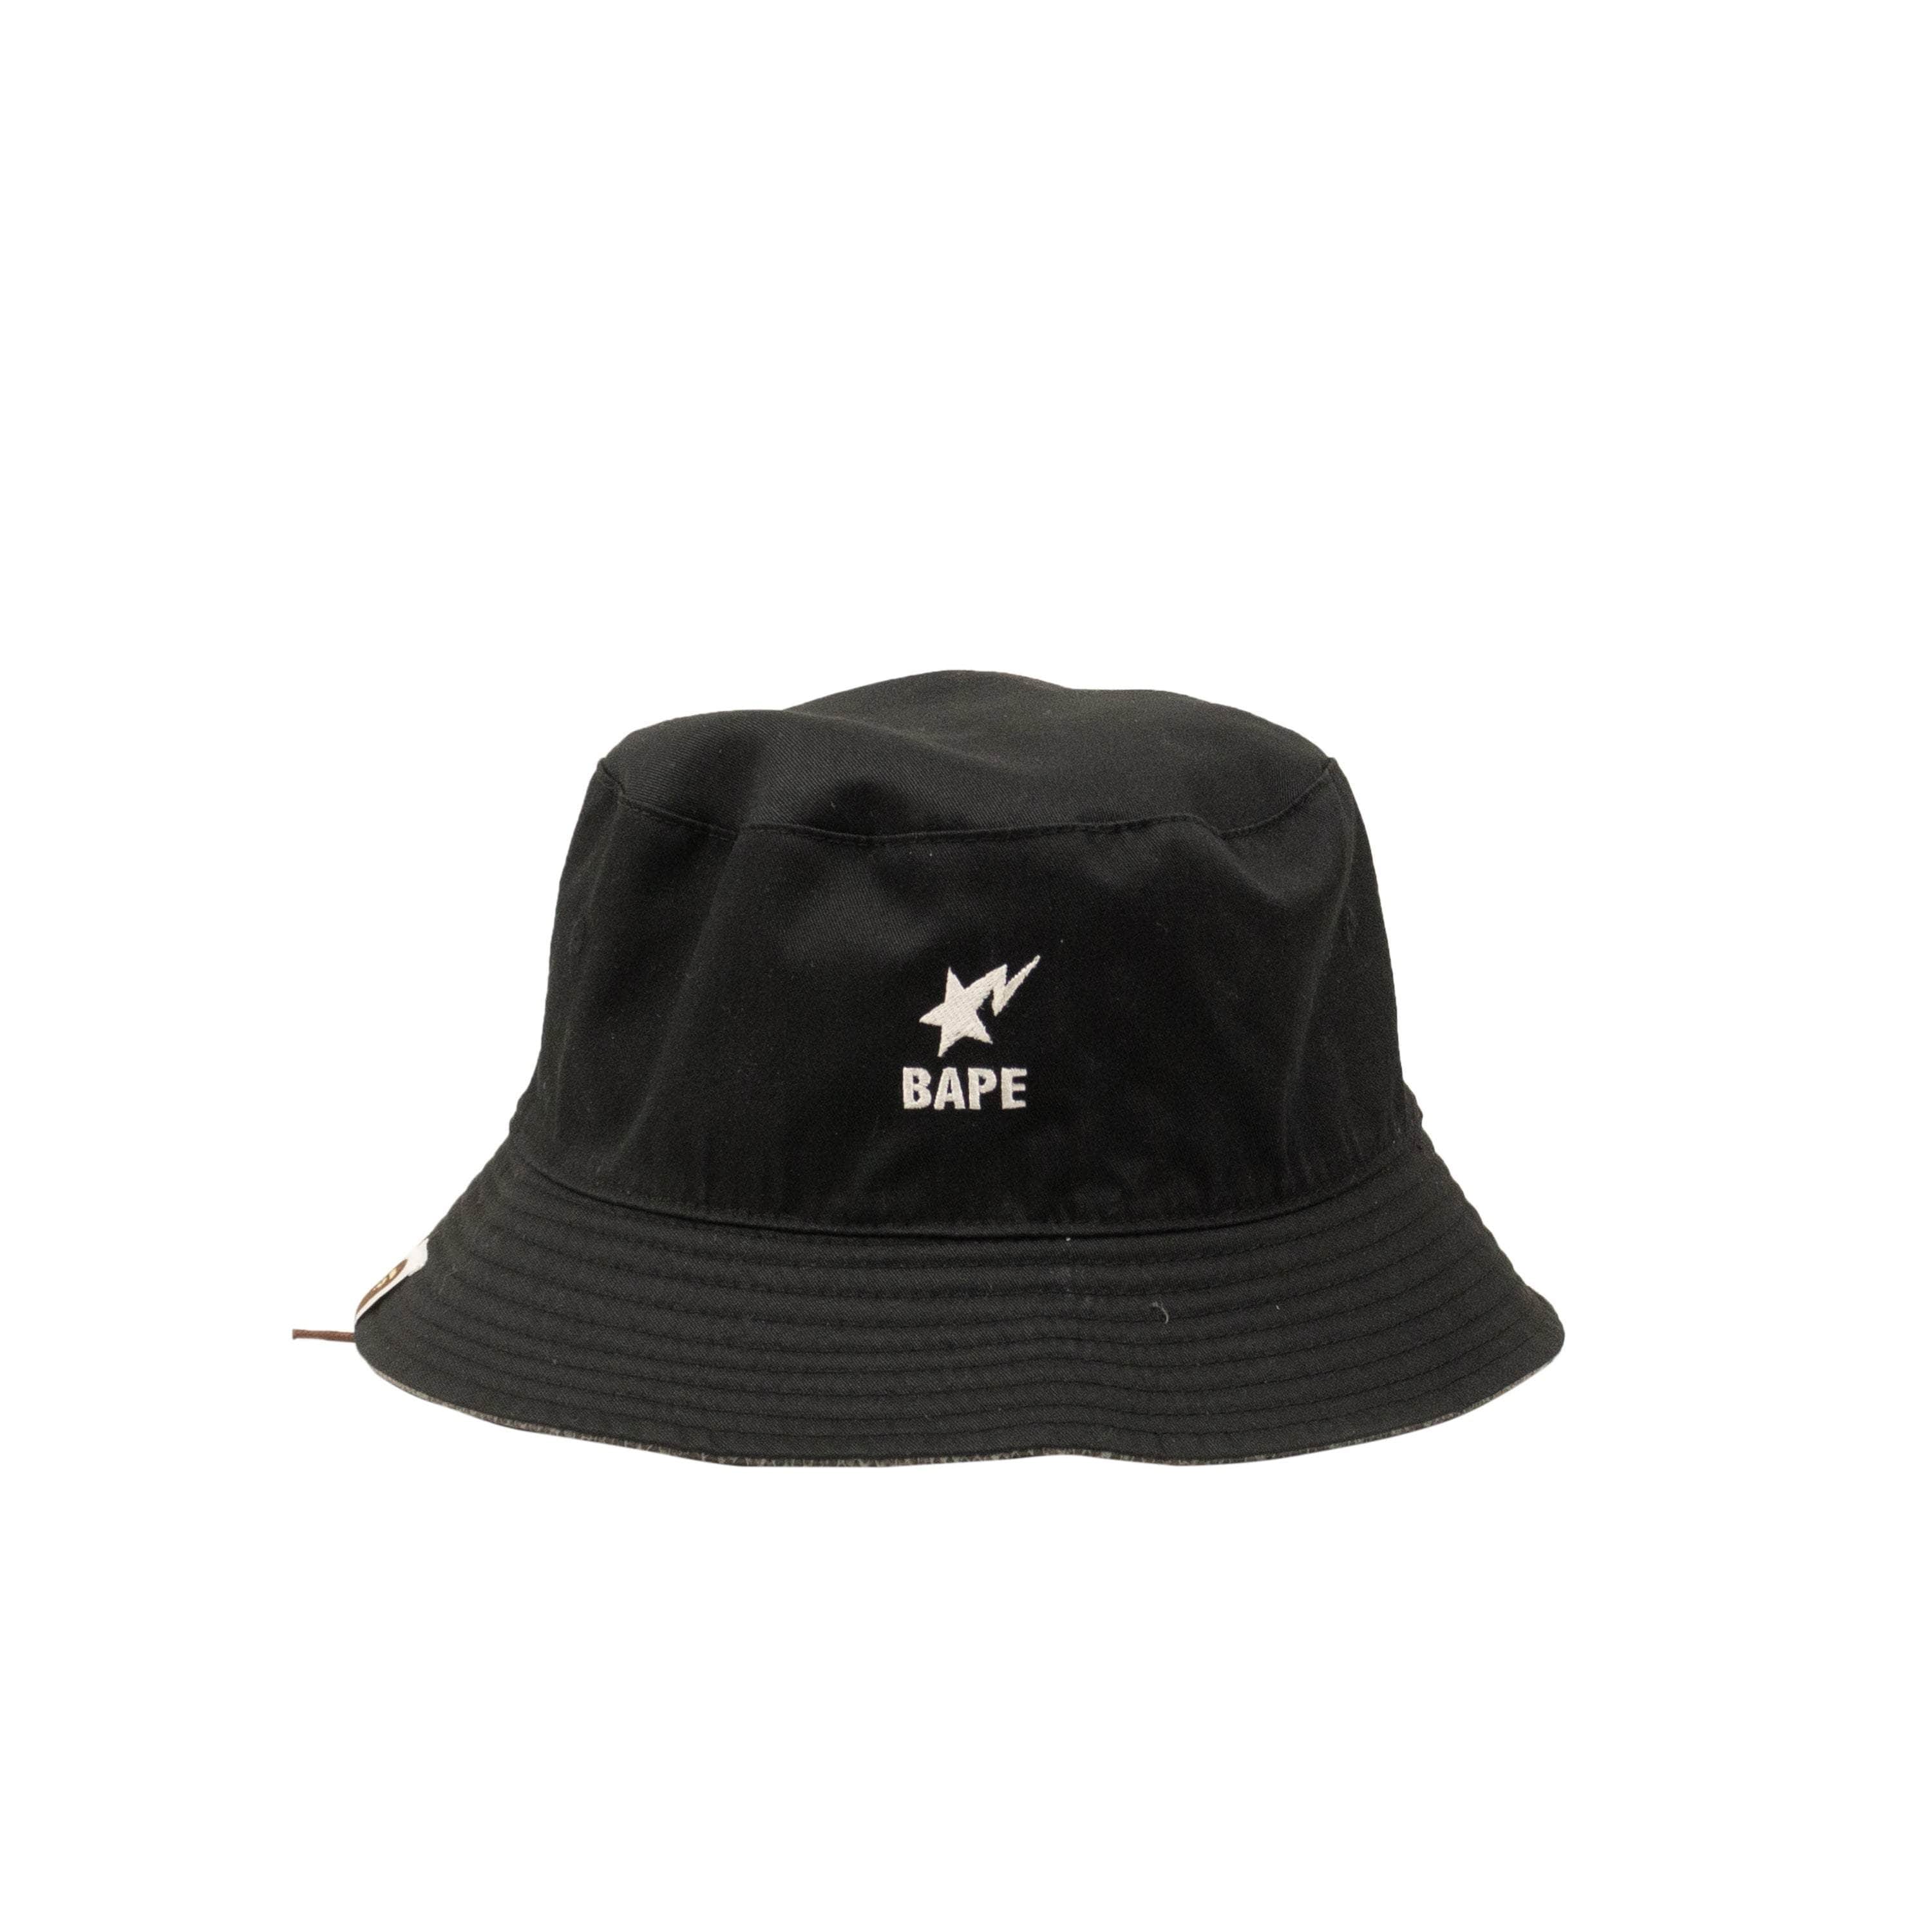 Bape bape, channelenable-all, chicmi, couponcollection, gender-mens, main-accessories, mens-shoes, shop375, size-l, under-250 L Black And Grey Snake Reversible Bucket Hat BAP-XACC-0016/L BAP-XACC-0016/L